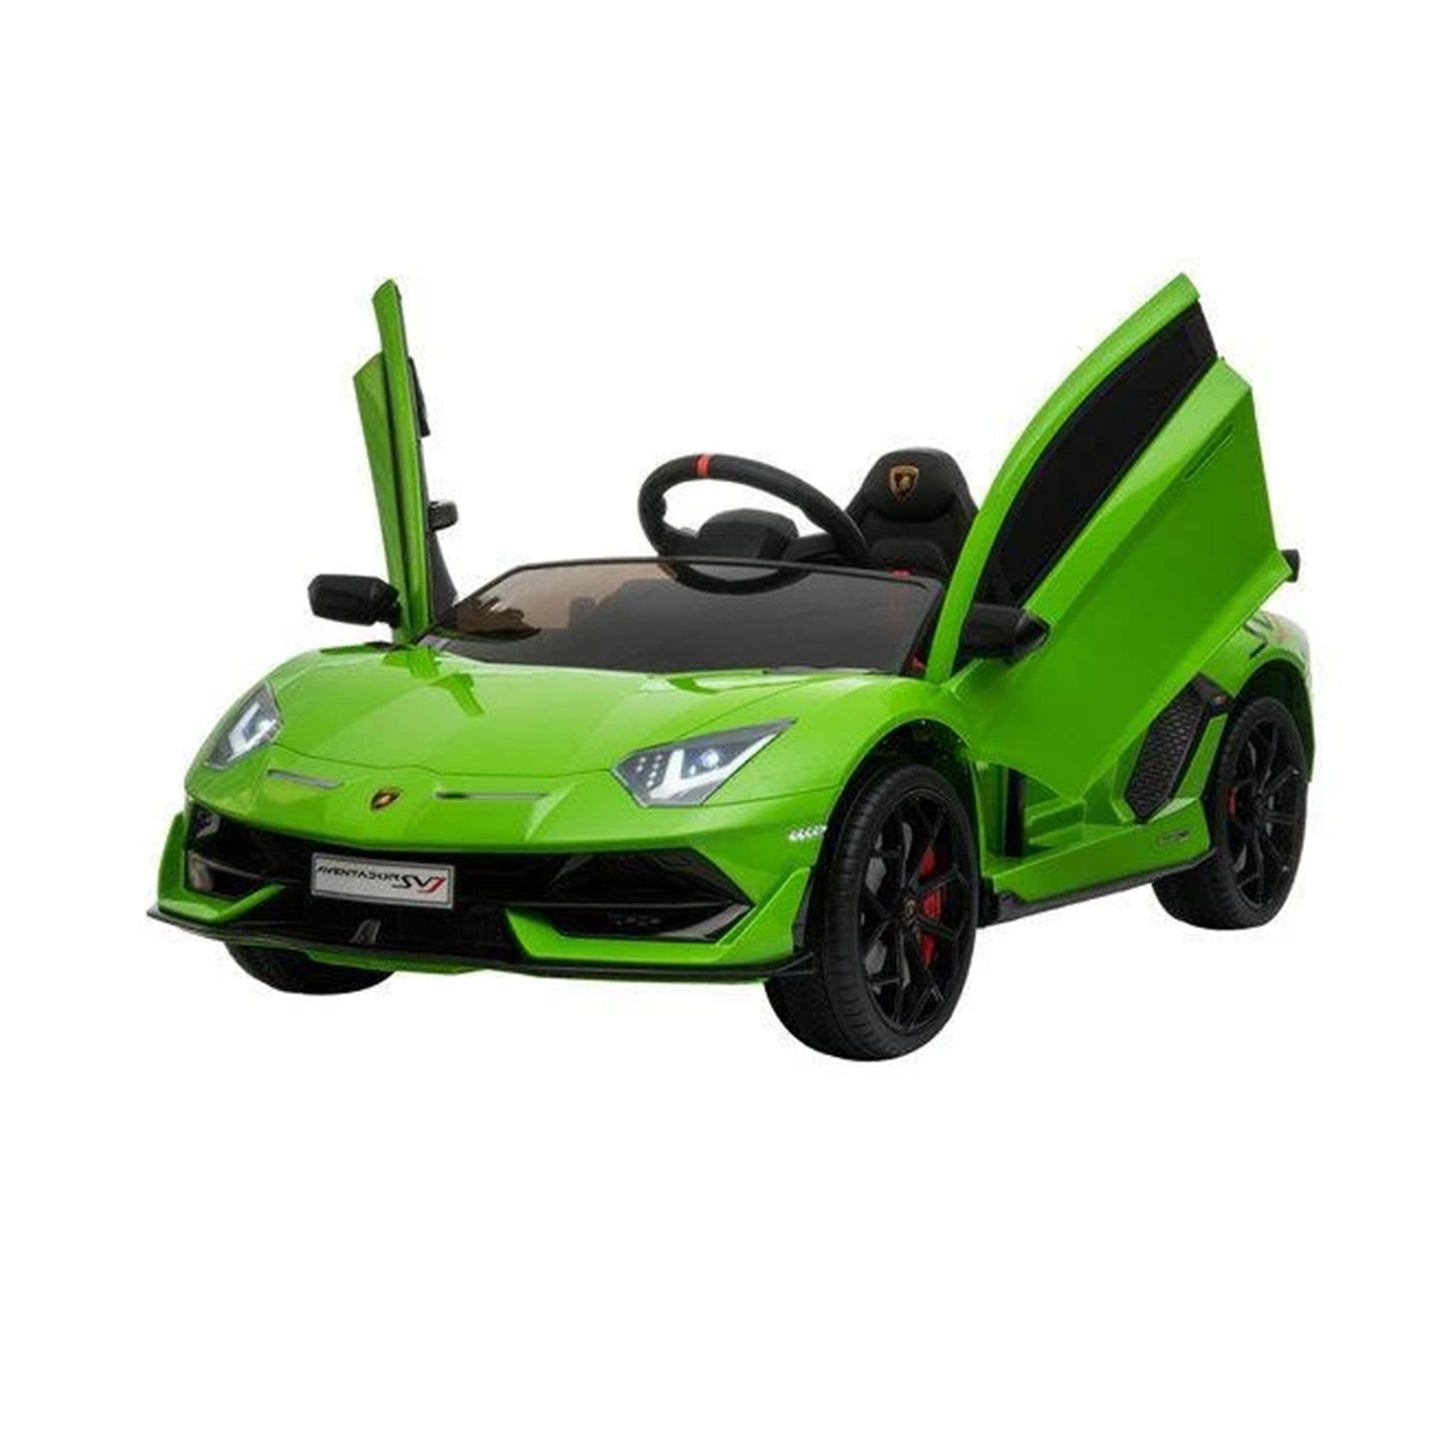 "Green Lamborghini SVJ Kids Ride car with parent remote from Kids Car Store. Comes with 2.4G remote control and operable doors."